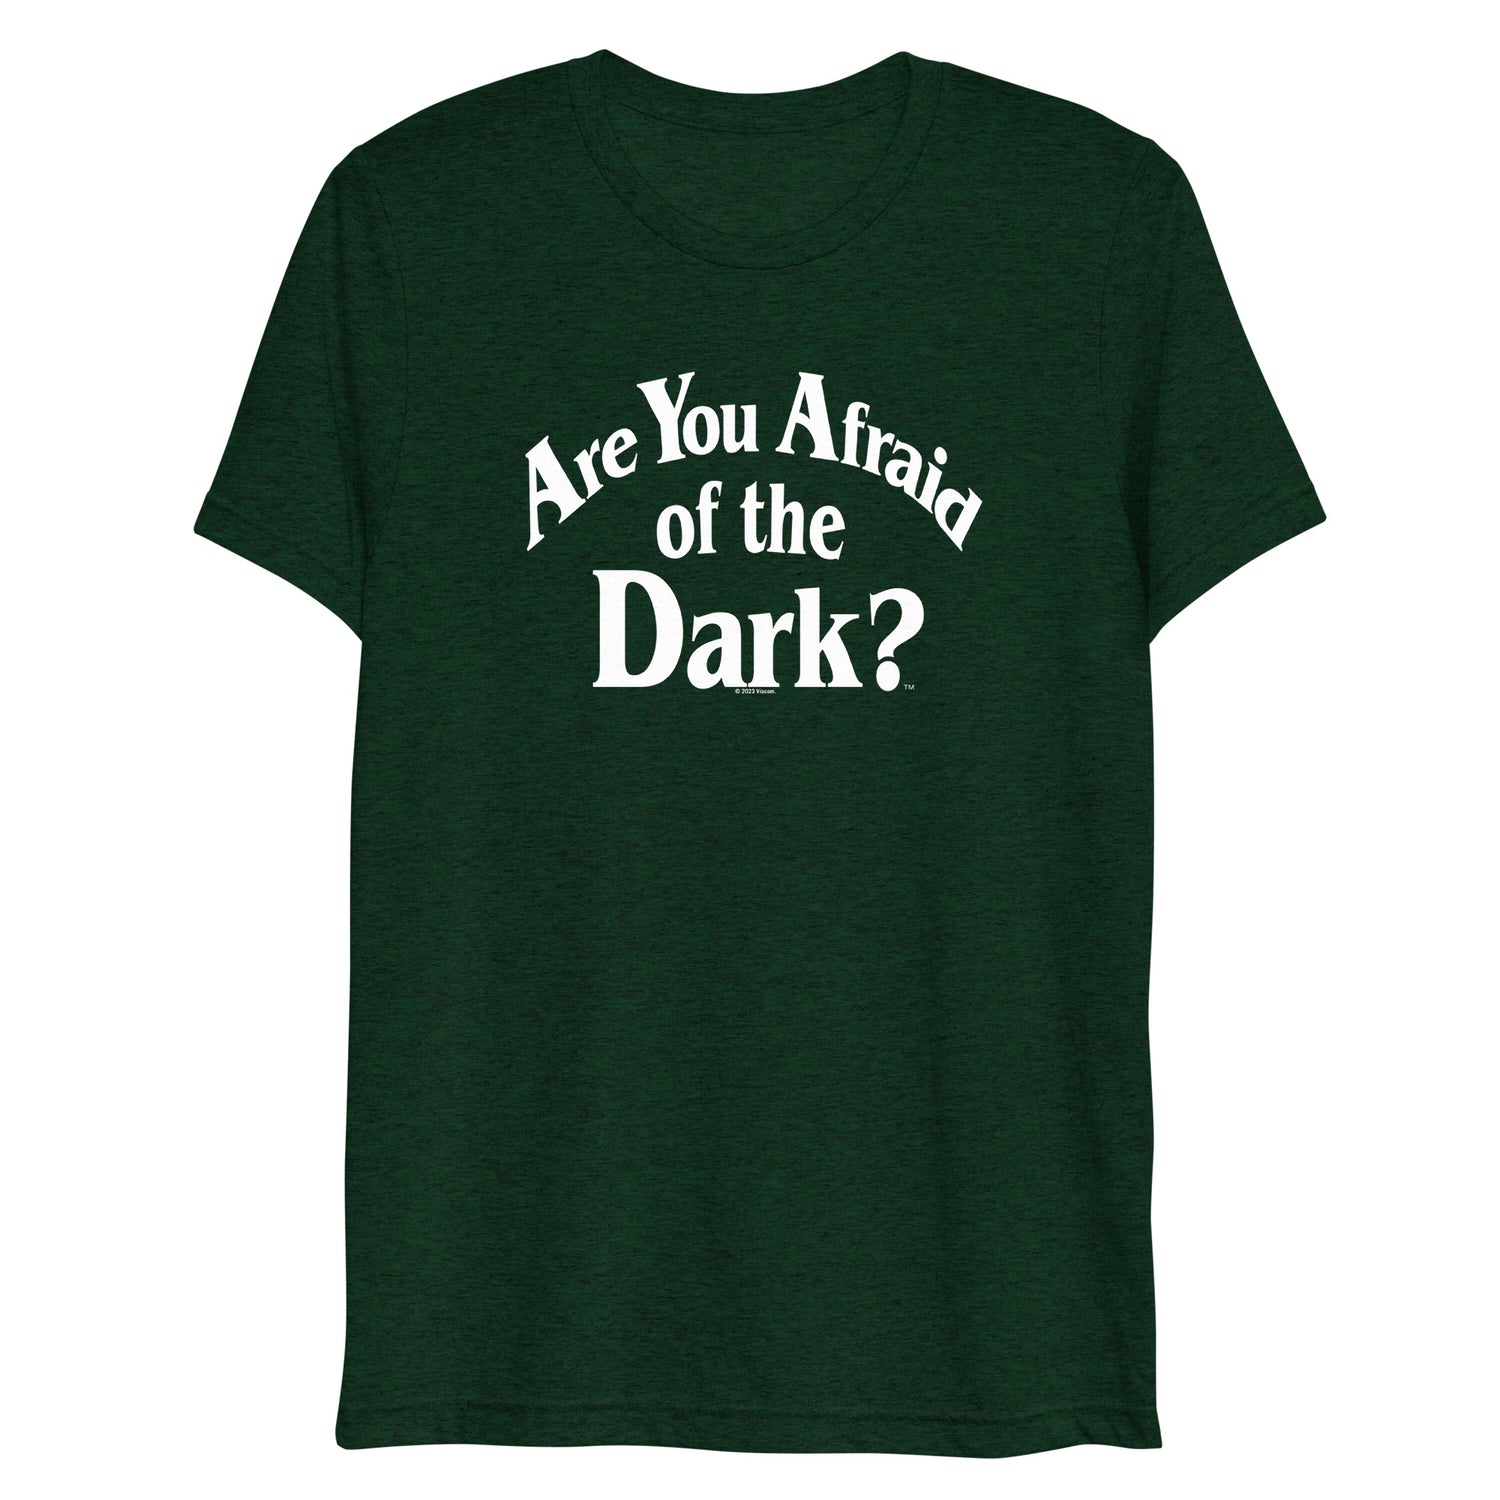 Are You Afraid of the Dark Logo Adult Short Sleeve T-Shirt